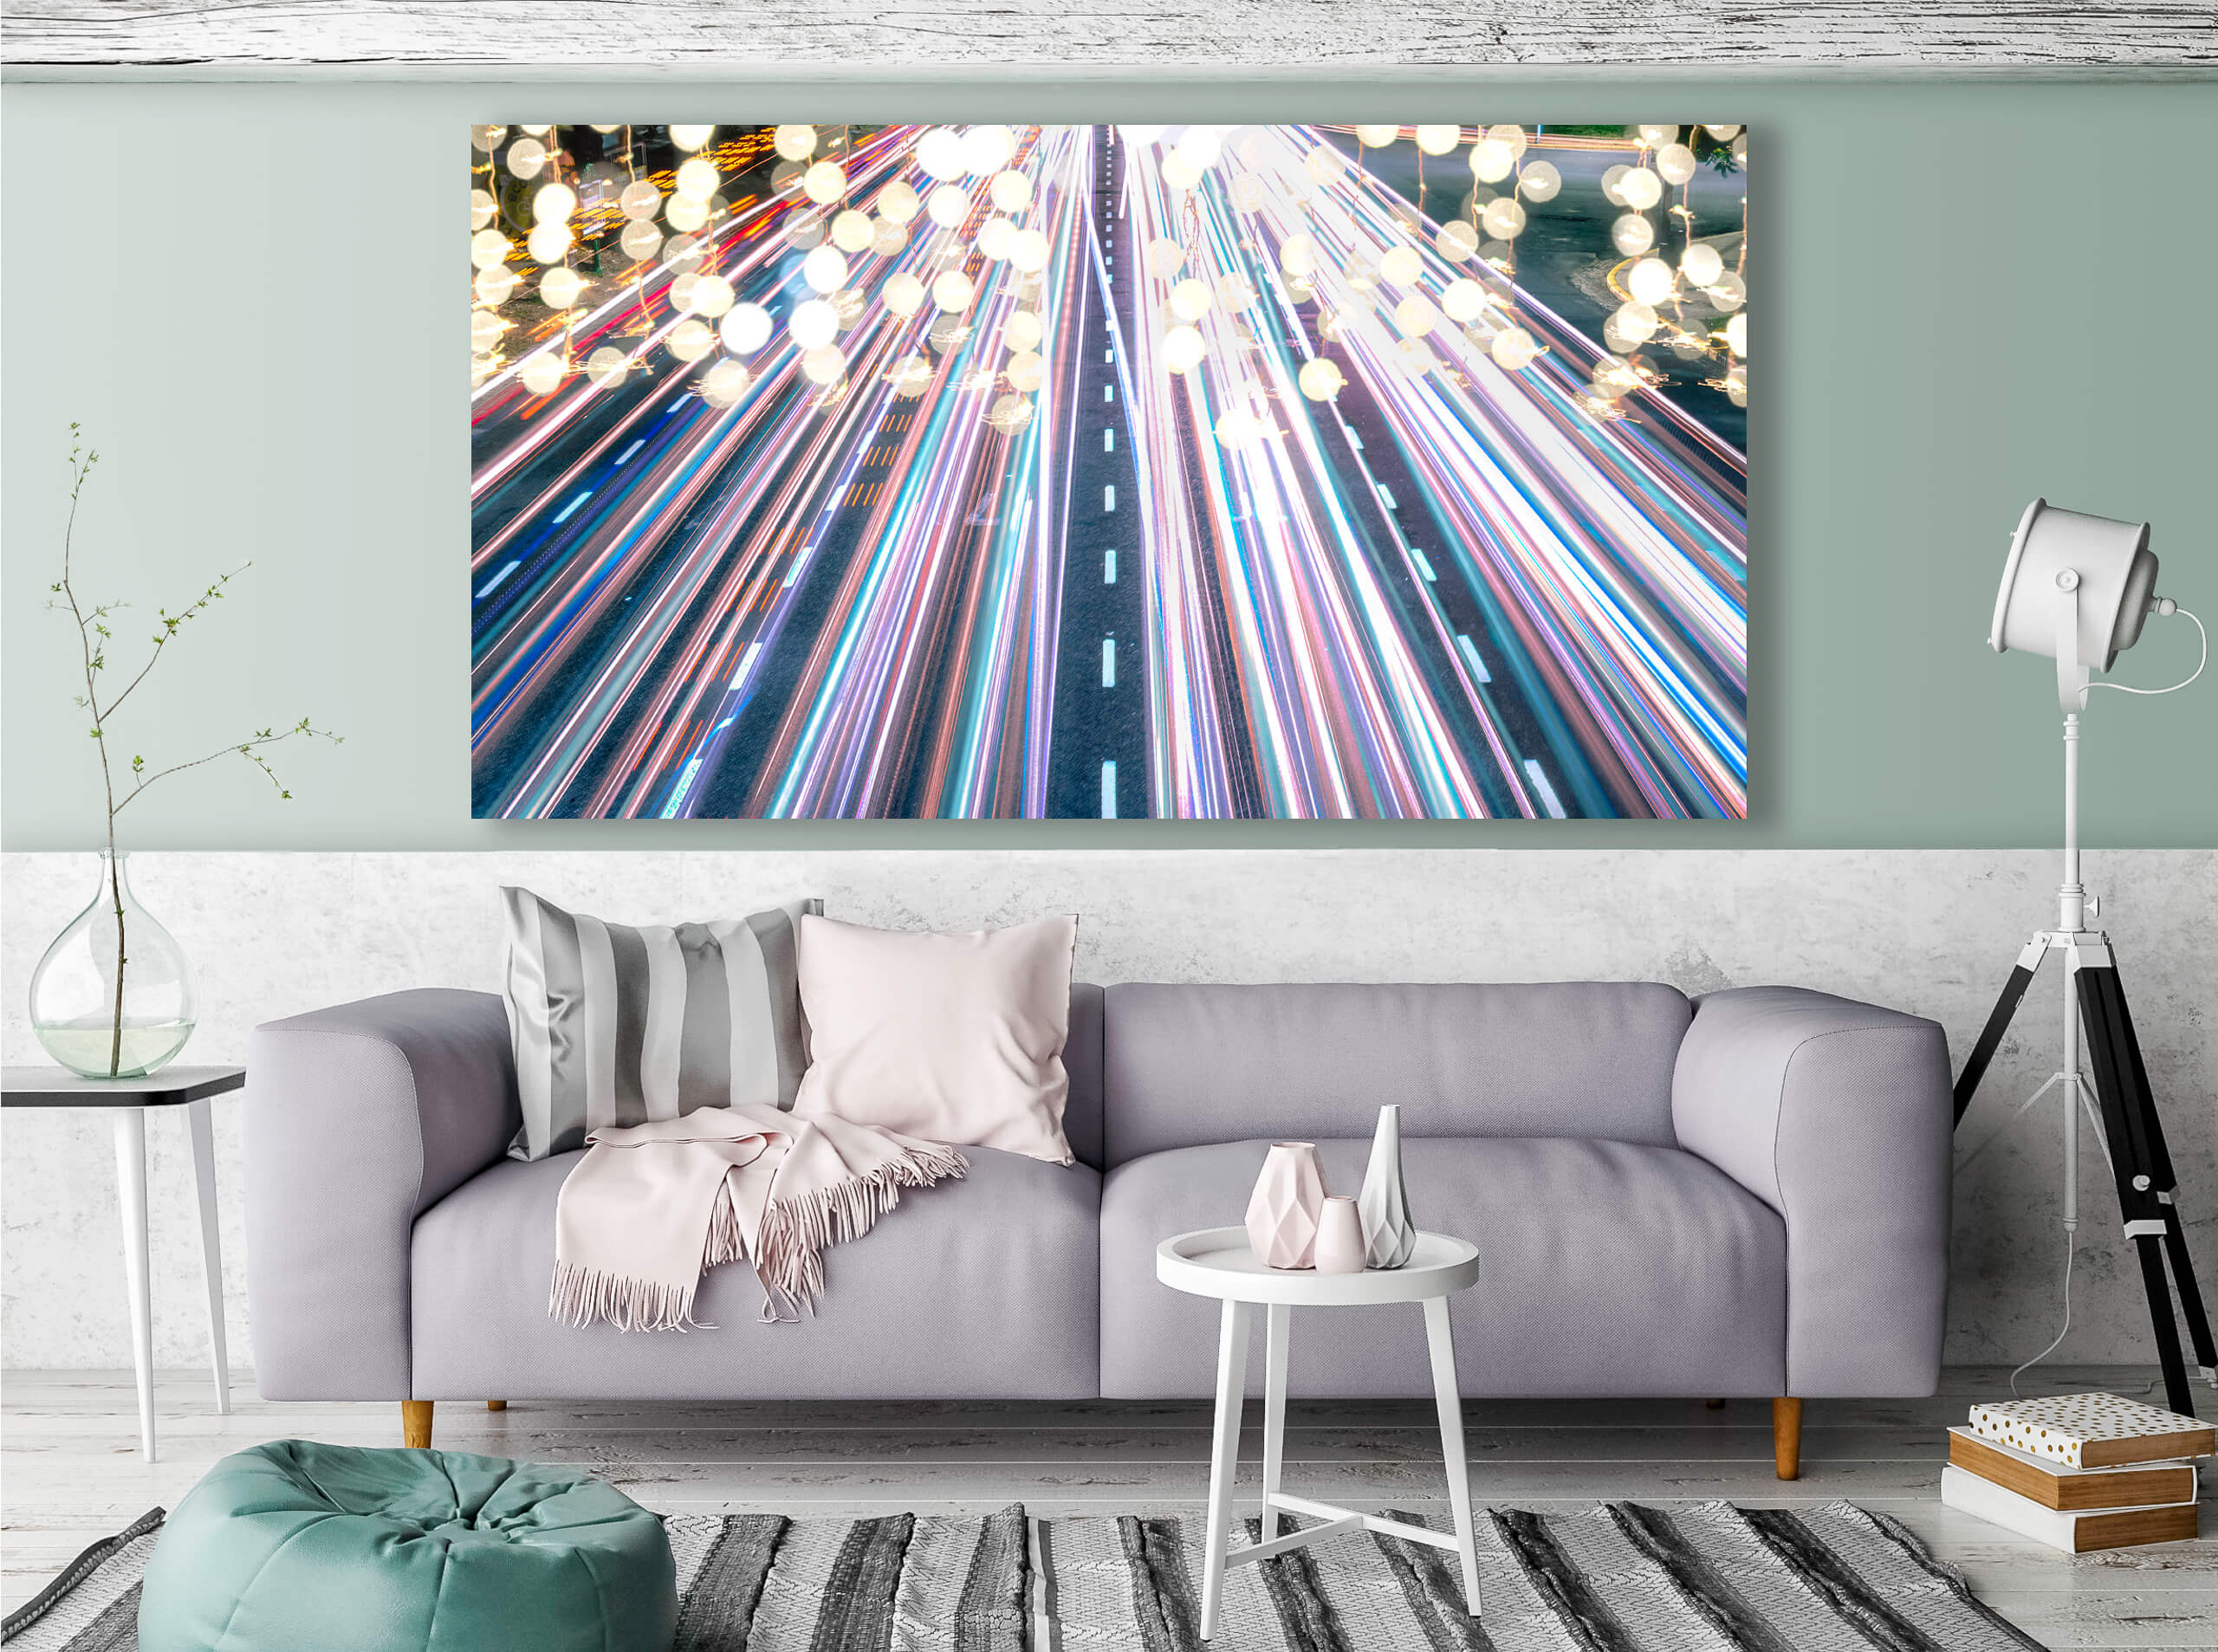 A photoboard image above a couch